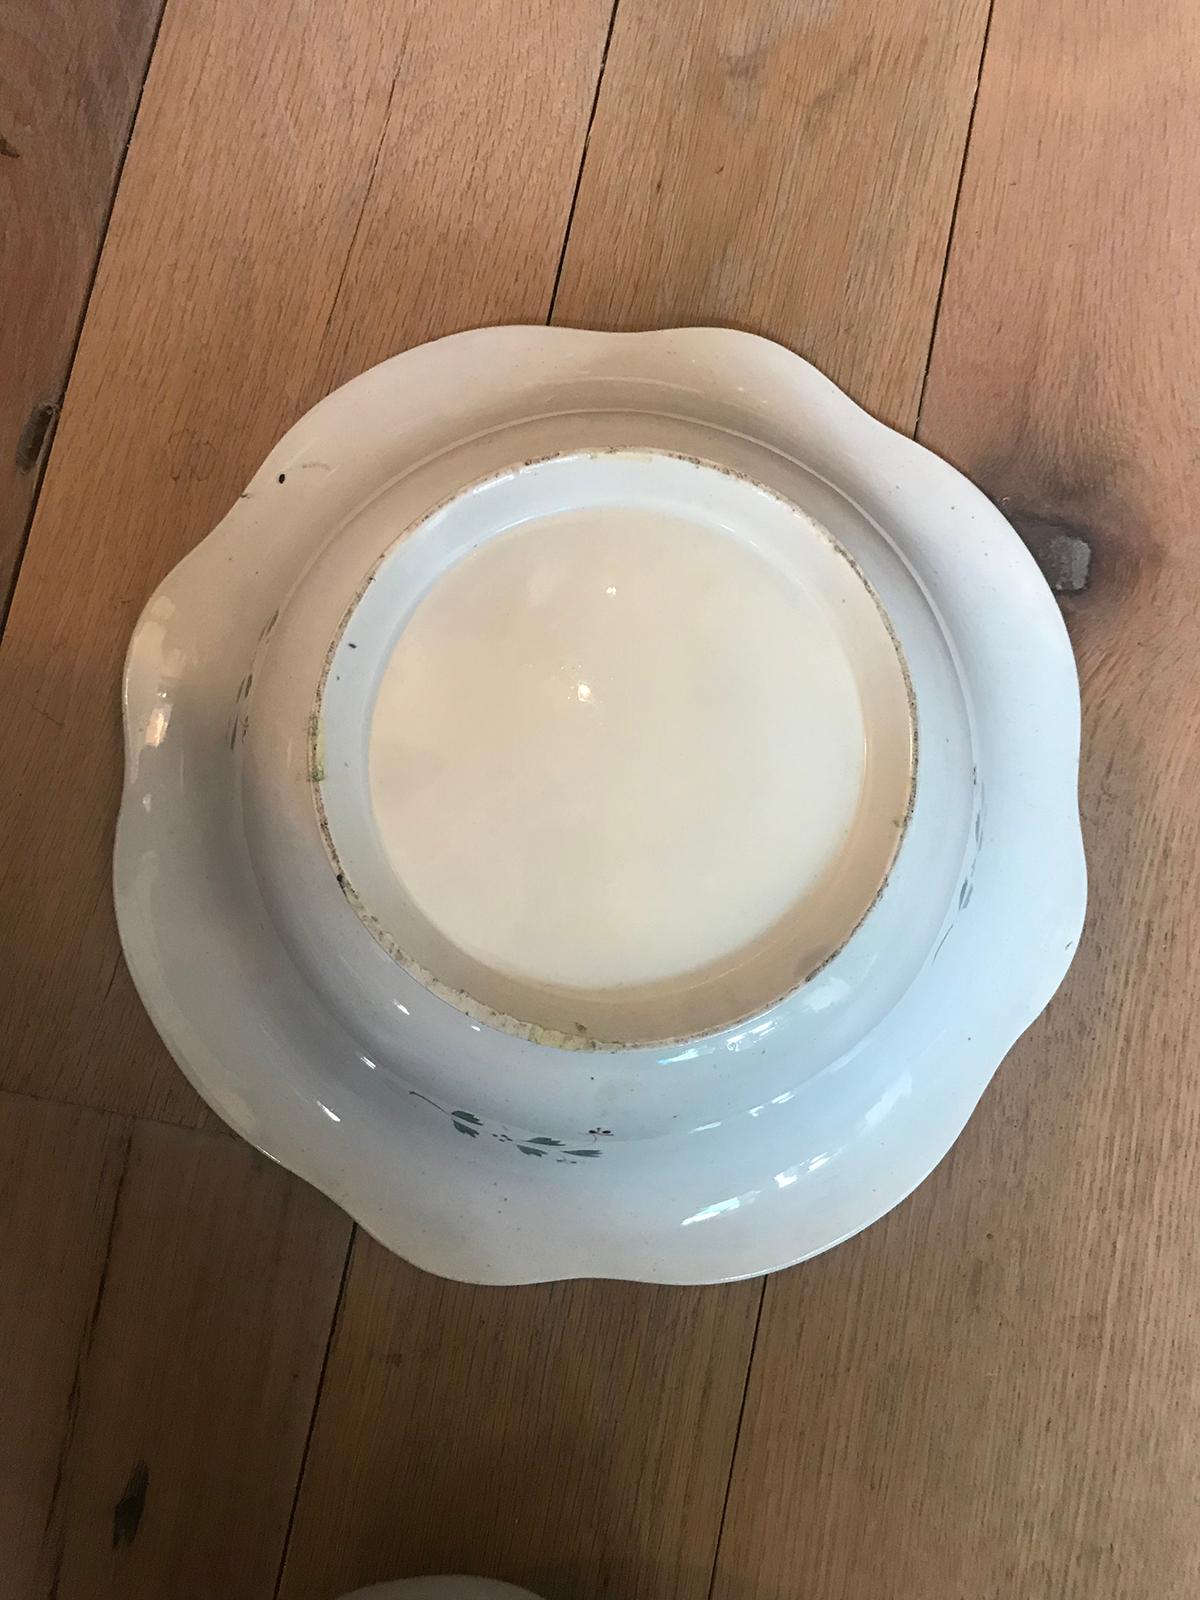 18th-19th Century American Sprigware Porcelain Bowl For Sale 6